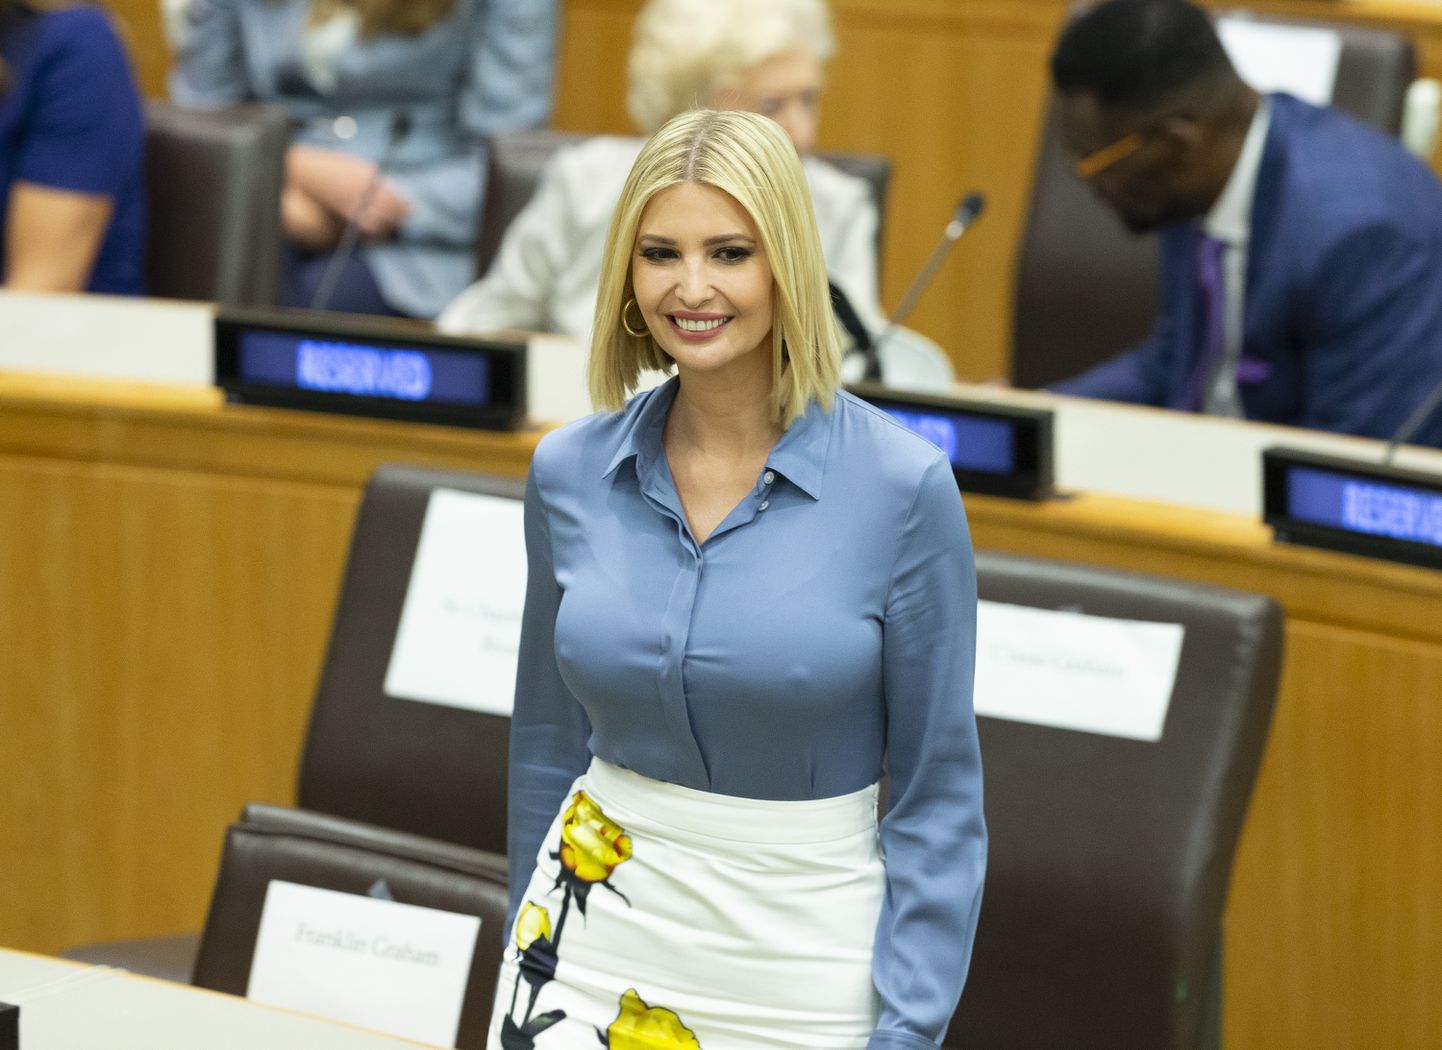 September 23, 2019, New York, New York, United States: Ivanka Trump attends UN global call to protect religious freedom meeting at UN Headquarters (Credit Image: © Lev Radin/Pacific Press via ZUMA Wire)